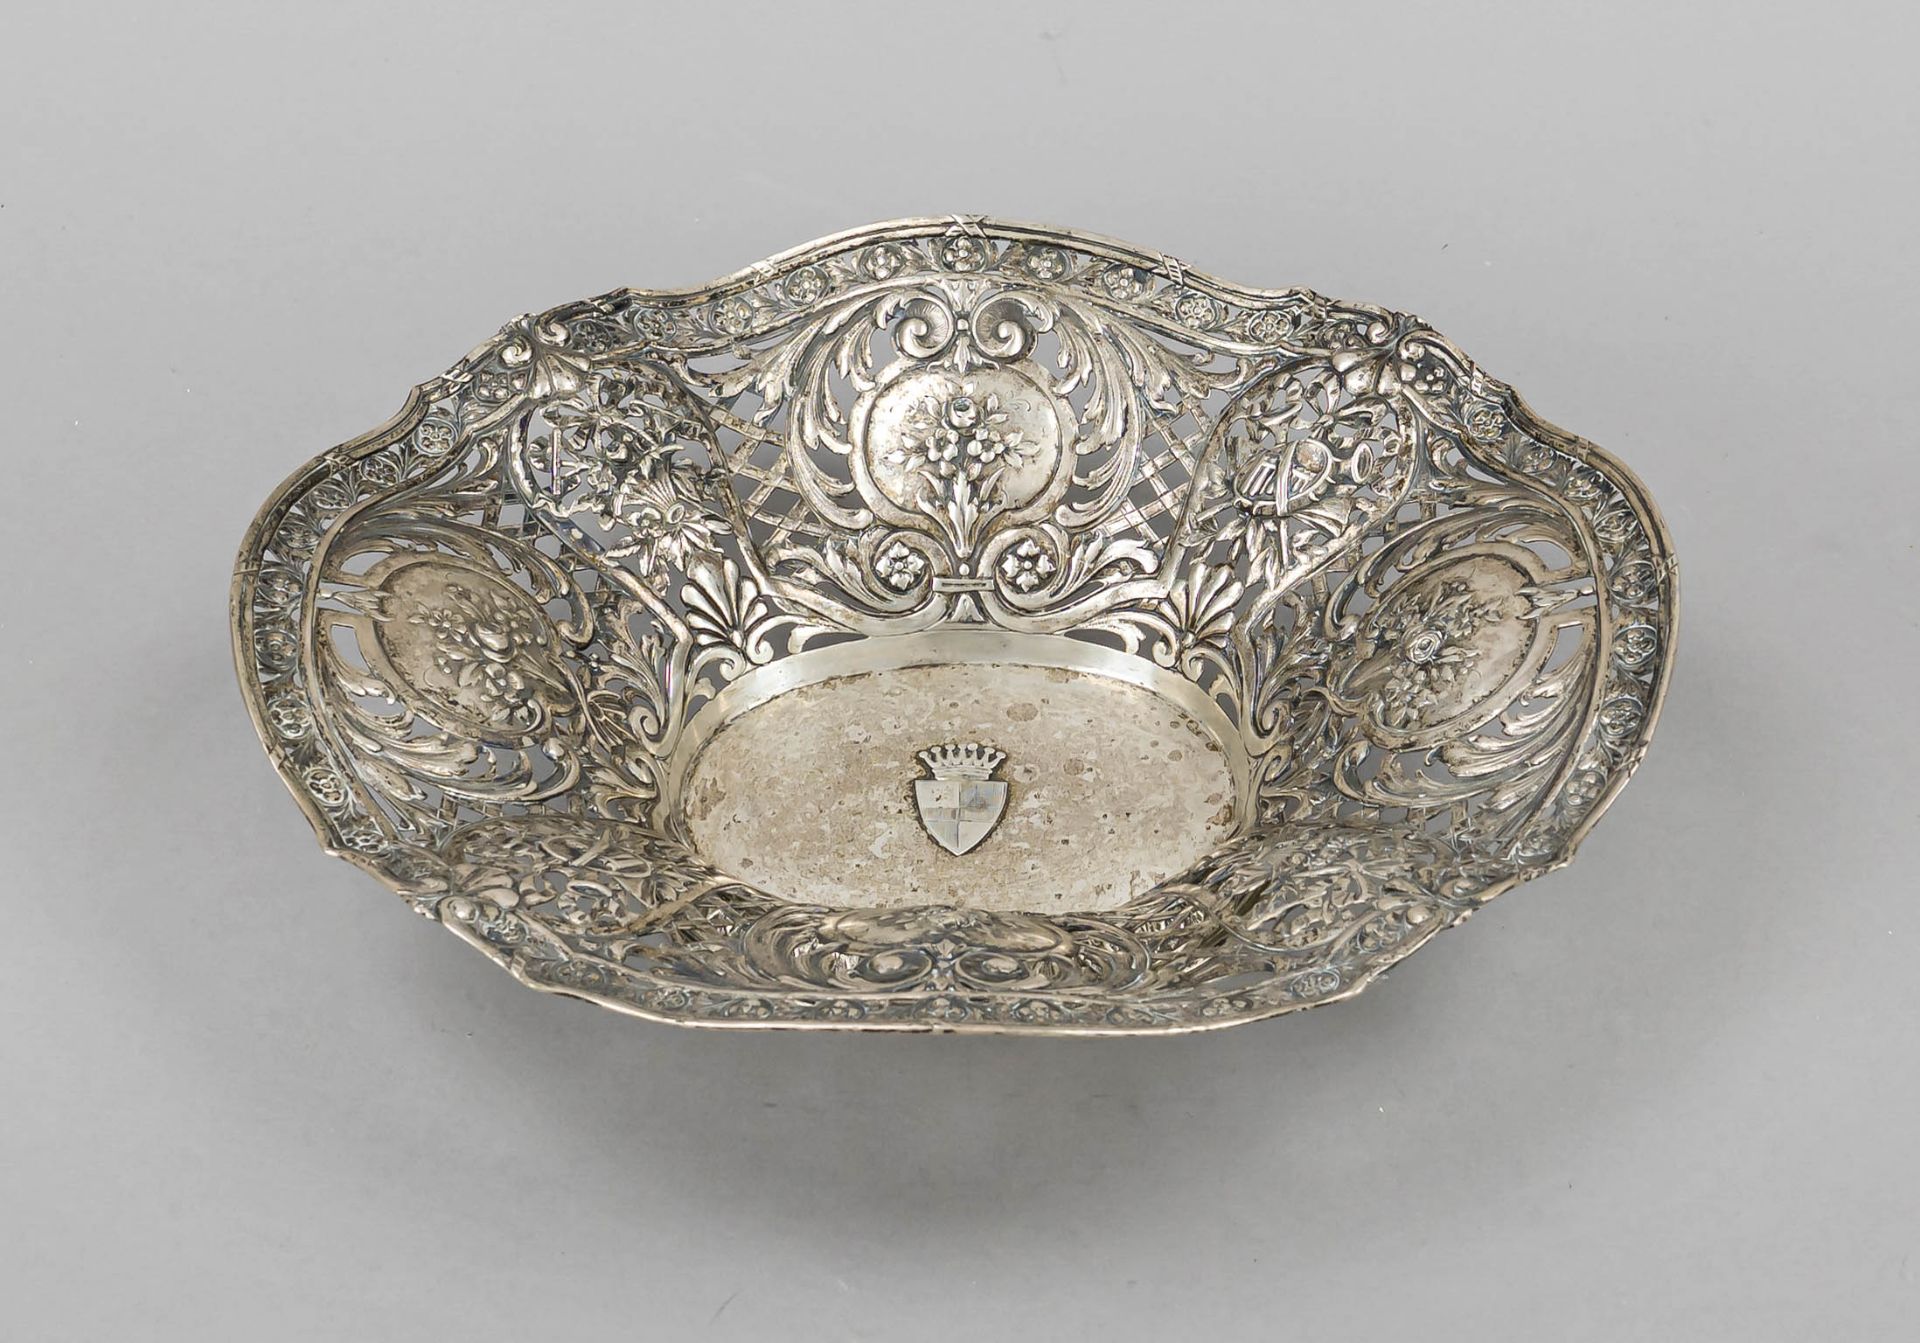 Oval openwork bowl, c. 1900, hallmarked silver, oval stand, curved body, richly pierced wall with